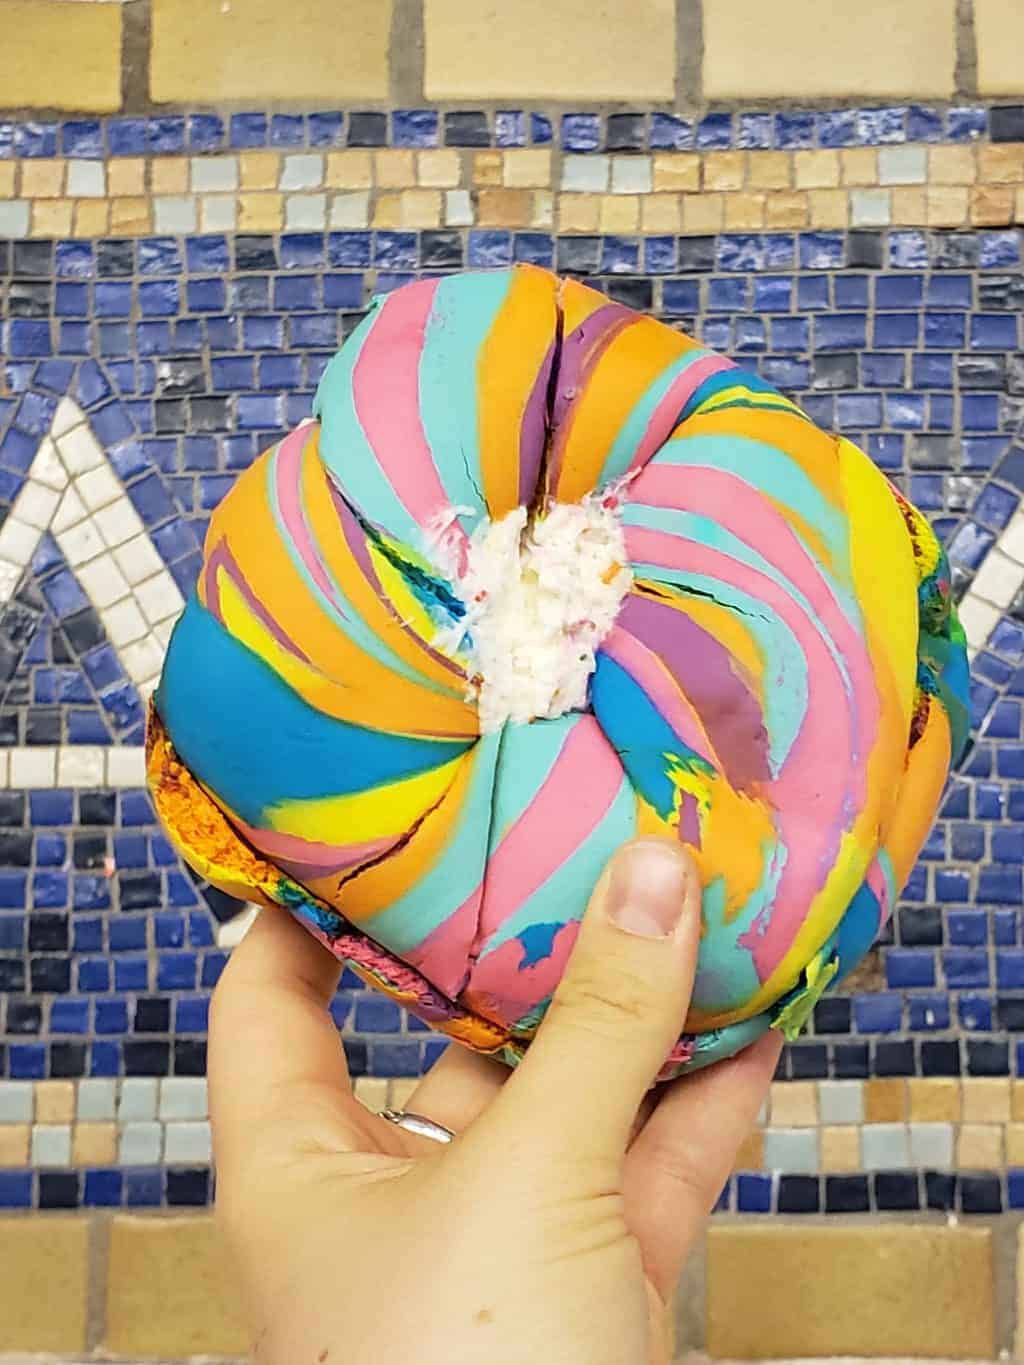 A rainbow colored bagel stuffed with cream cheese held up before I enjoyed one of the most delicious and yet unusual things to do in NYC.